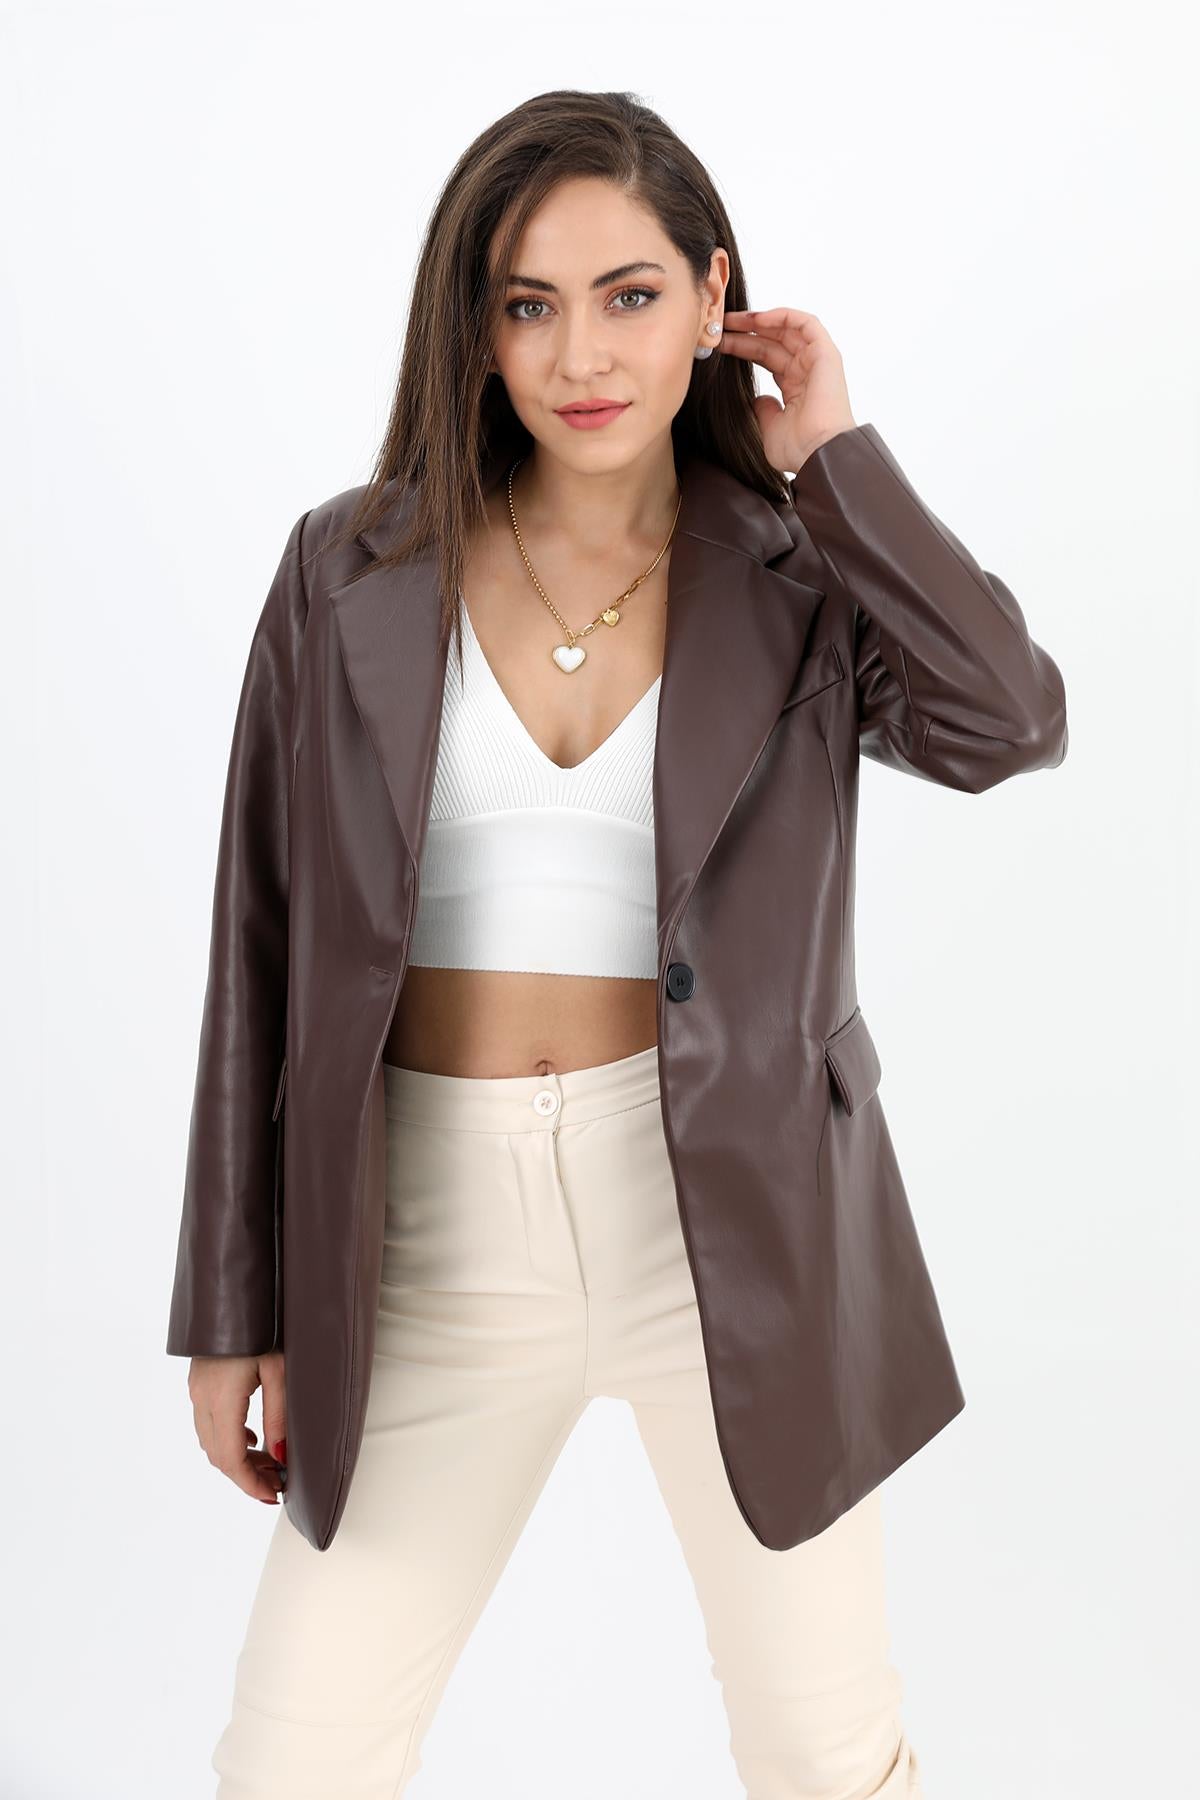 Women's Pocket Flap Leather Blazer Jacket with Padded Shoulders - Brown - STREETMODE™